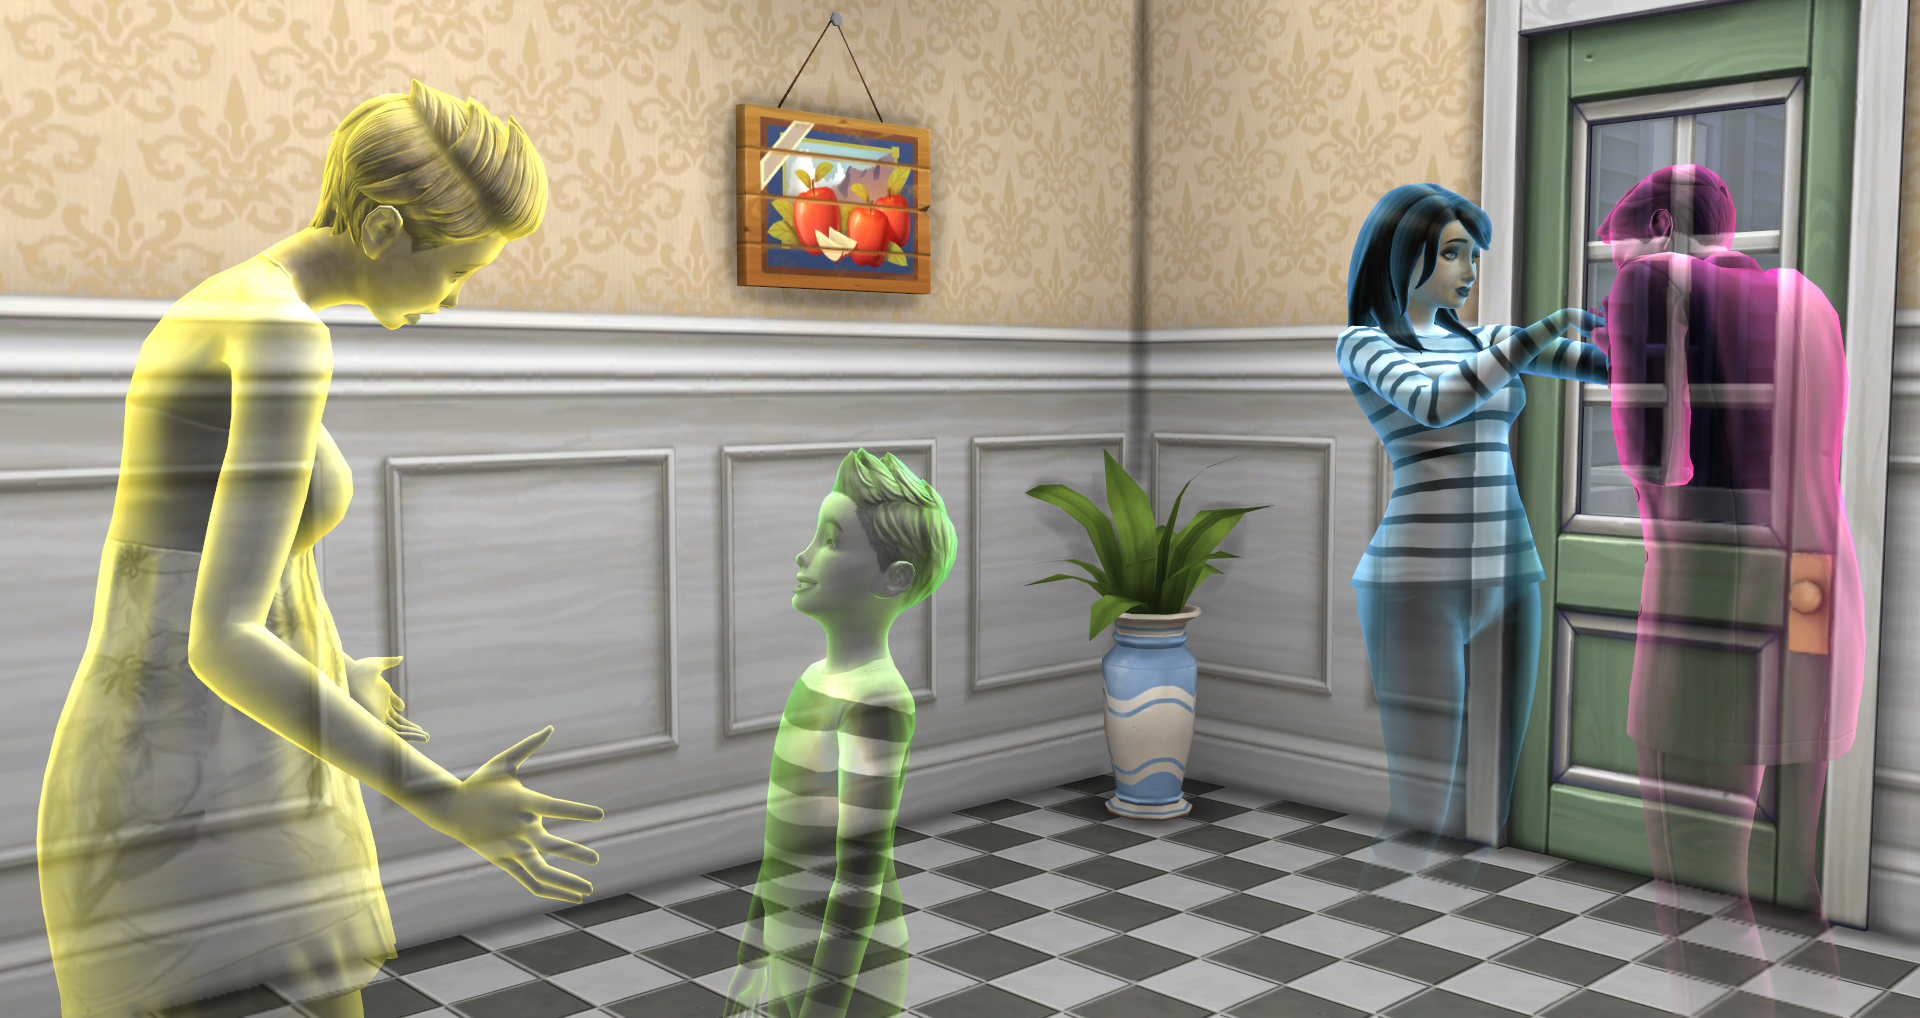   Ghosts in The Sims 4   Ghosts are the supernatural life...